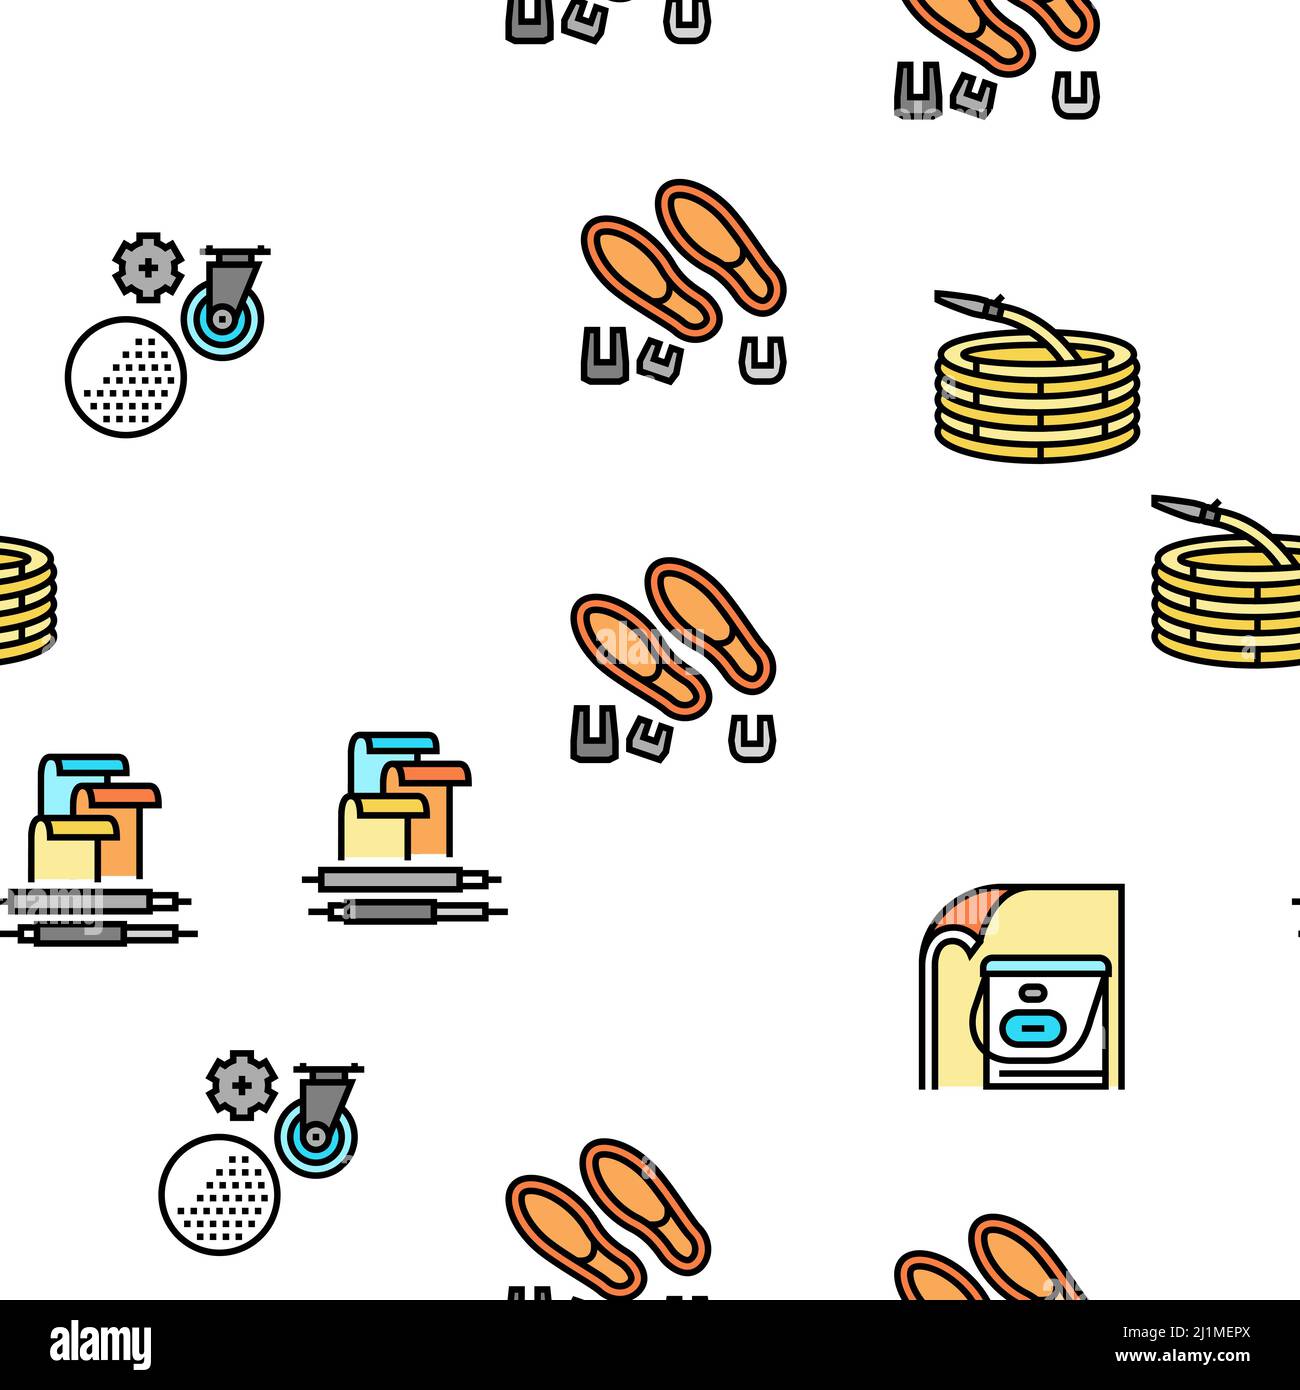 Polymer Material Industry Goods Vector Seamless Pattern Stock Vector